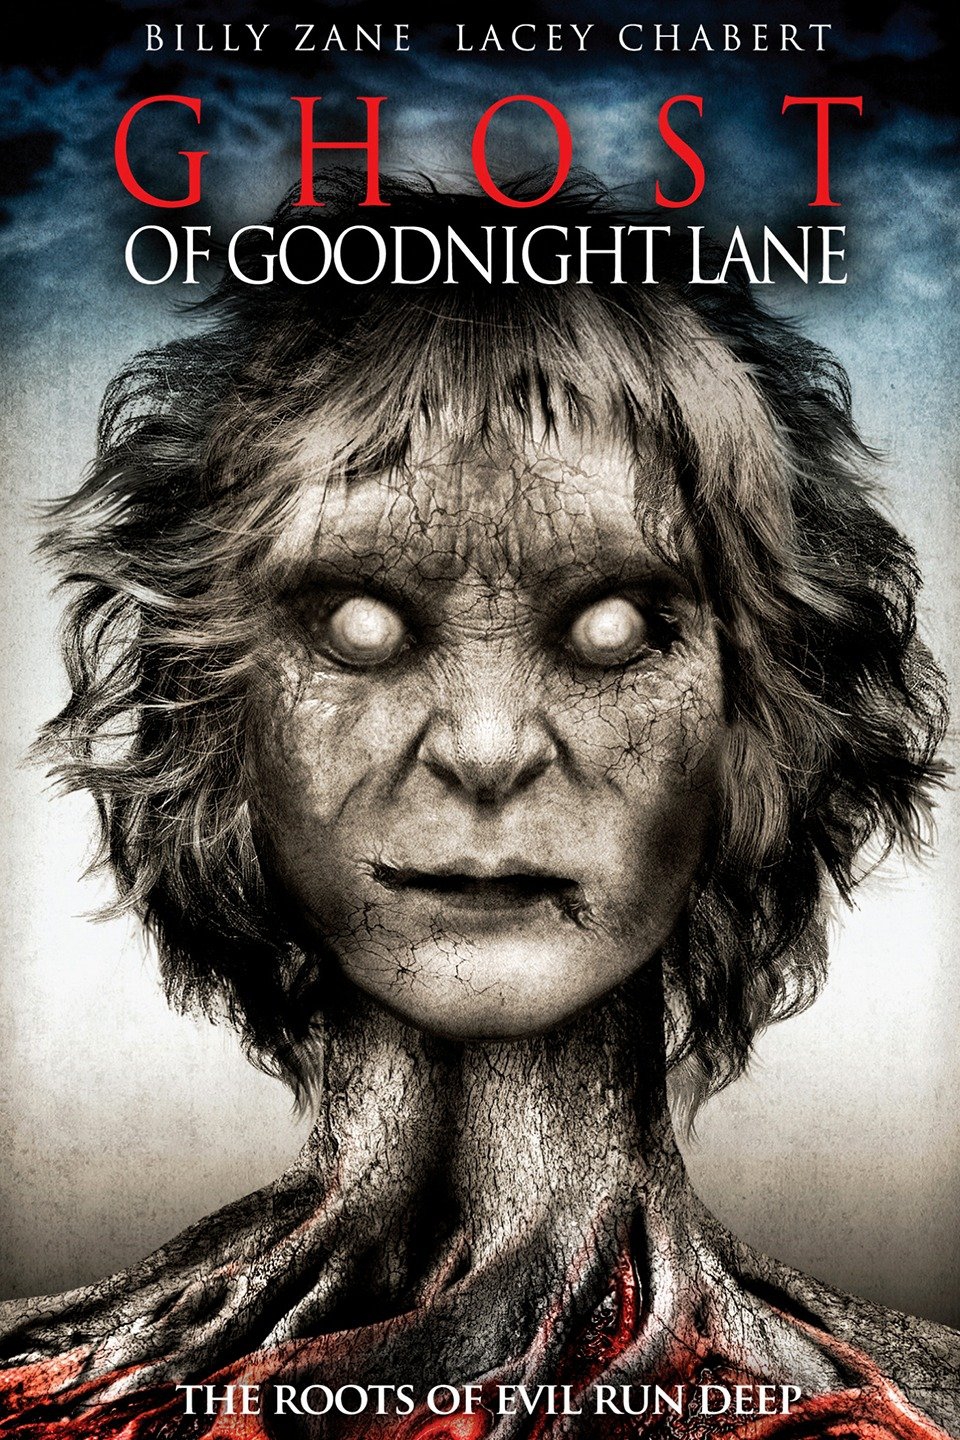 Watch Ghost of Goodnight Lane (2014) Online for Free